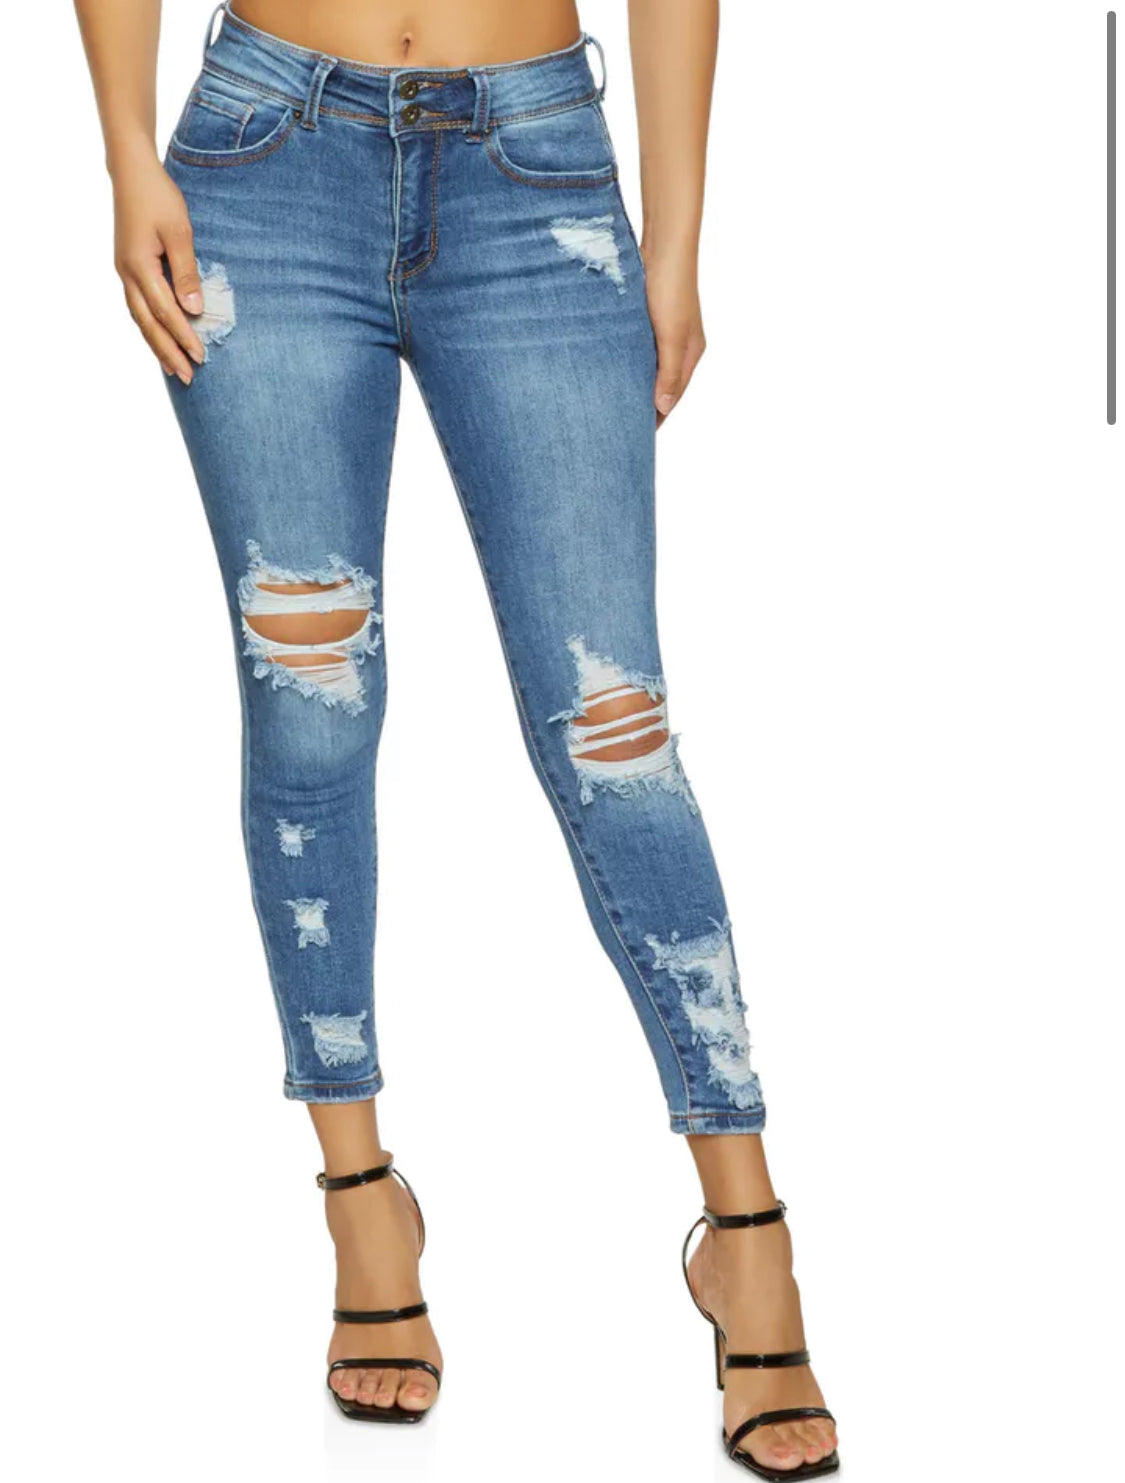 Whiskered Ripped Knee Jeans - Medium Wash